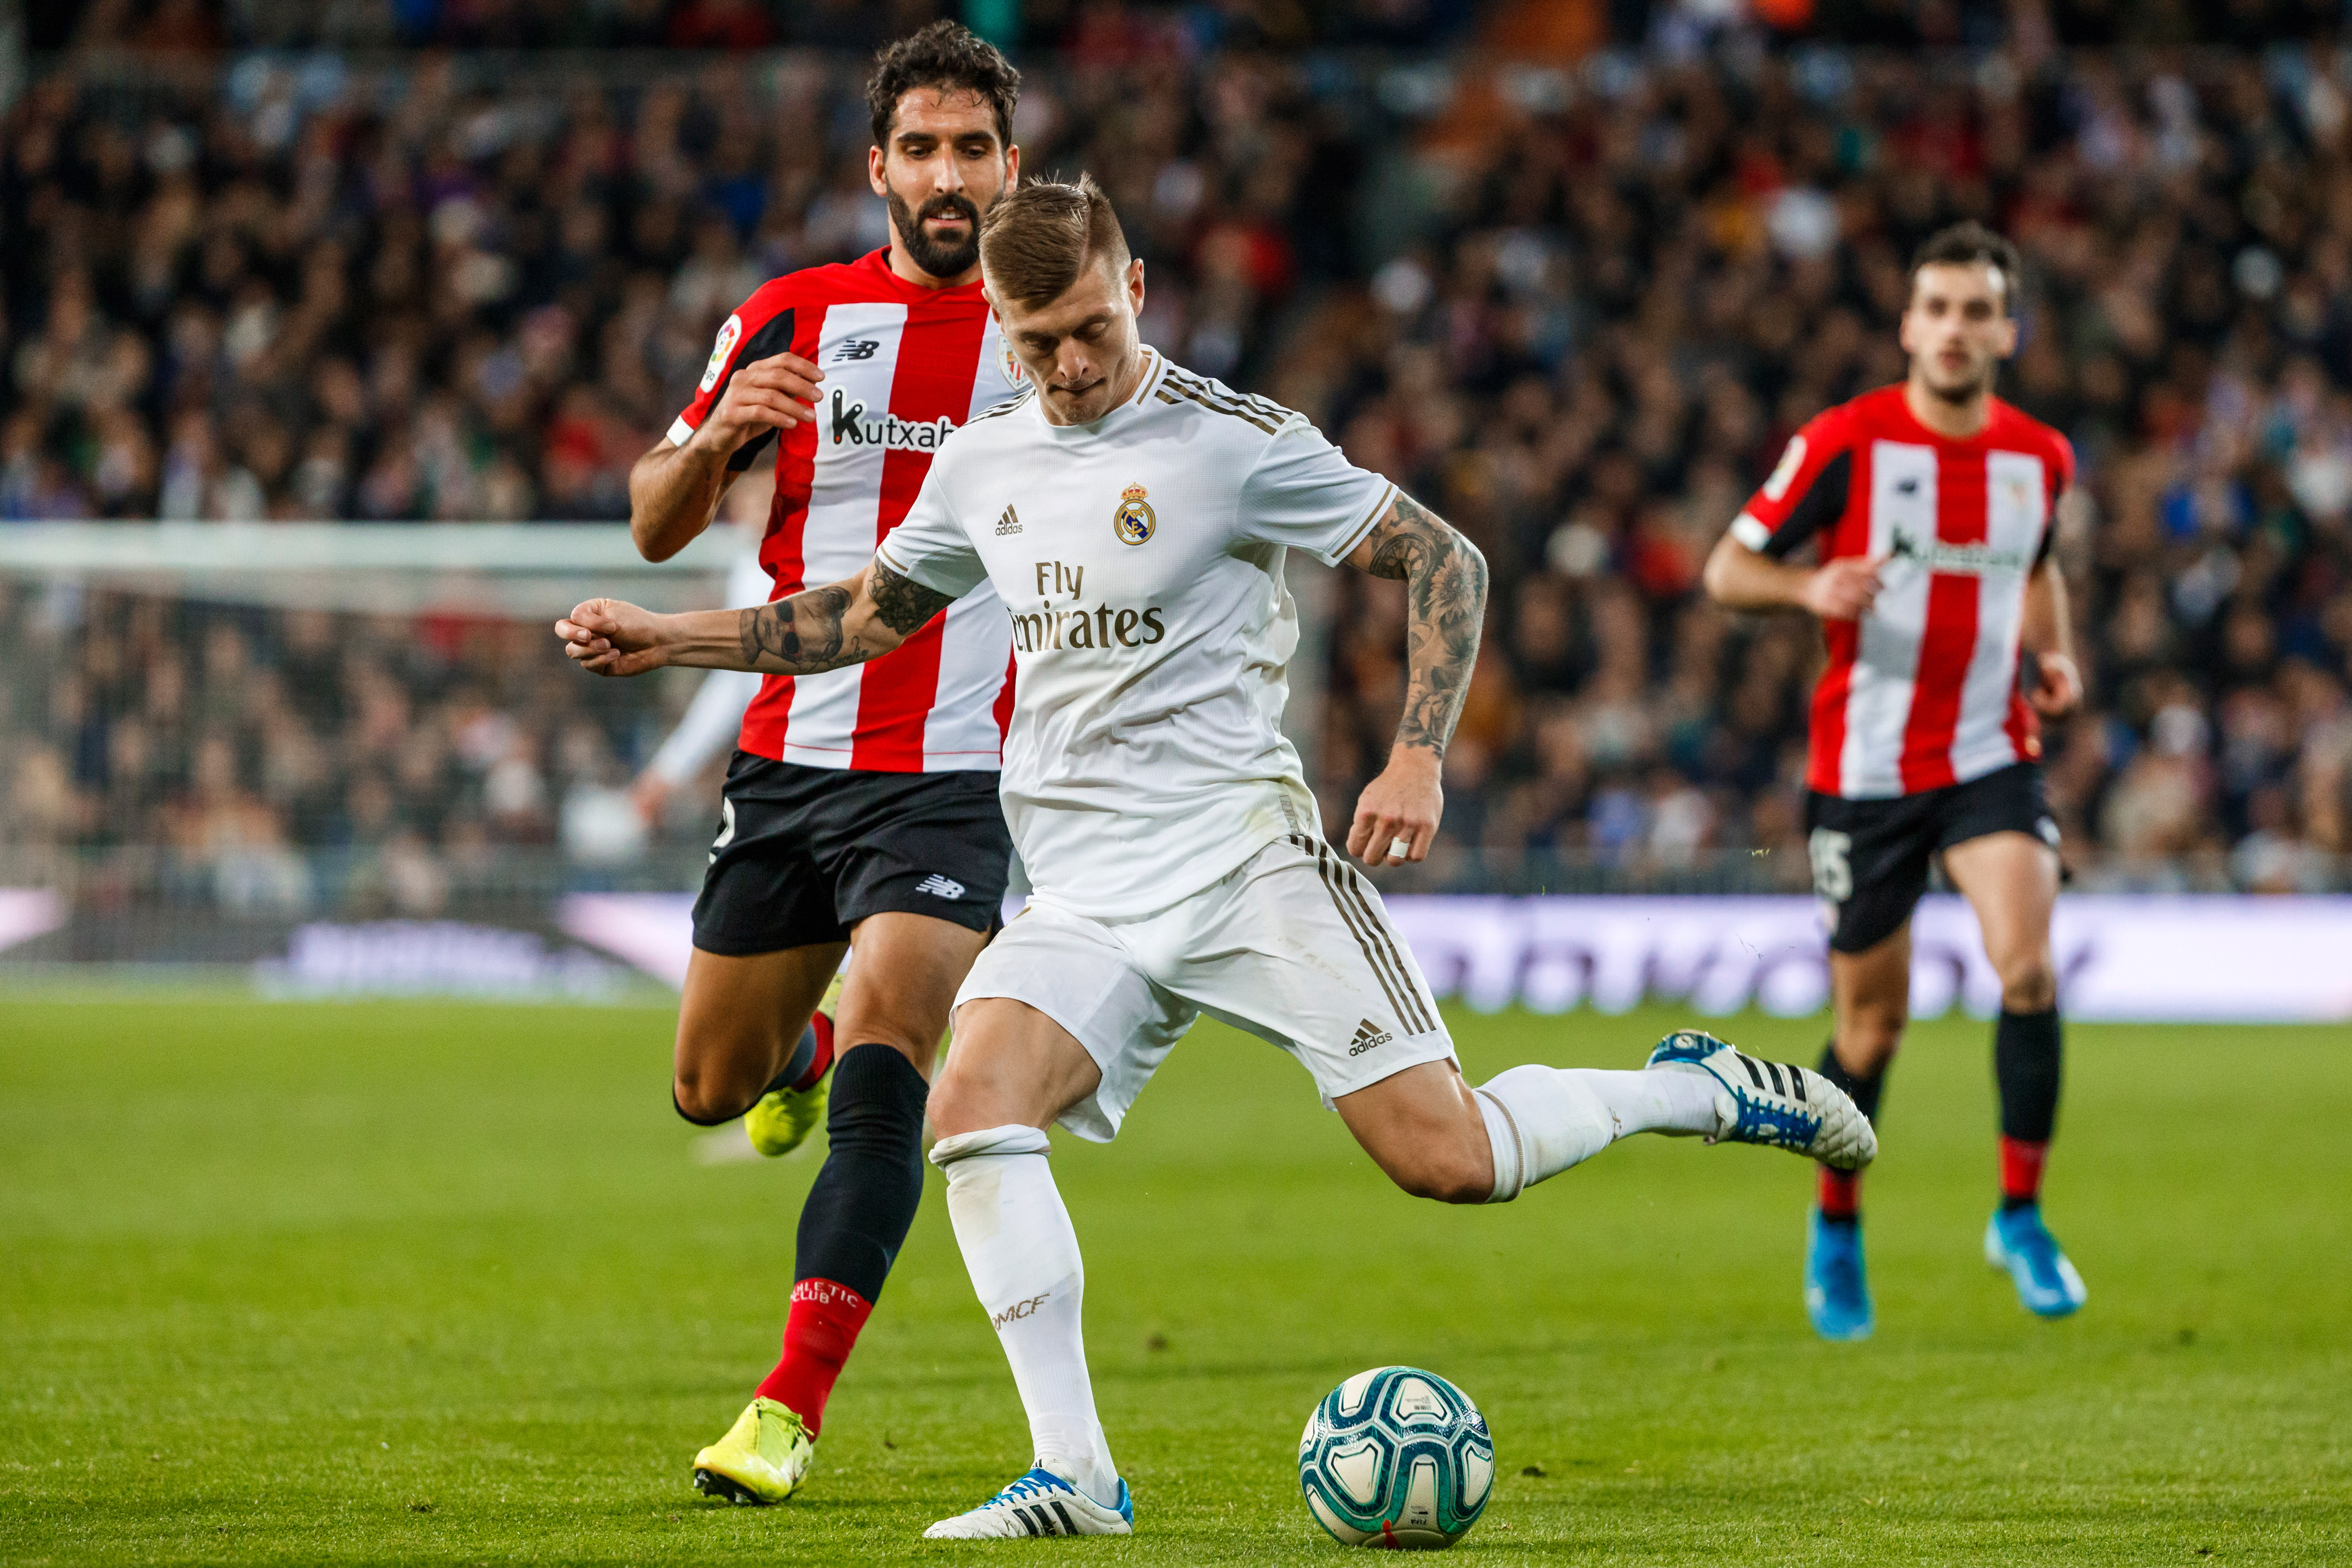 Toni Kroos in action for Real Madrid against Athletic Club in December 2019.